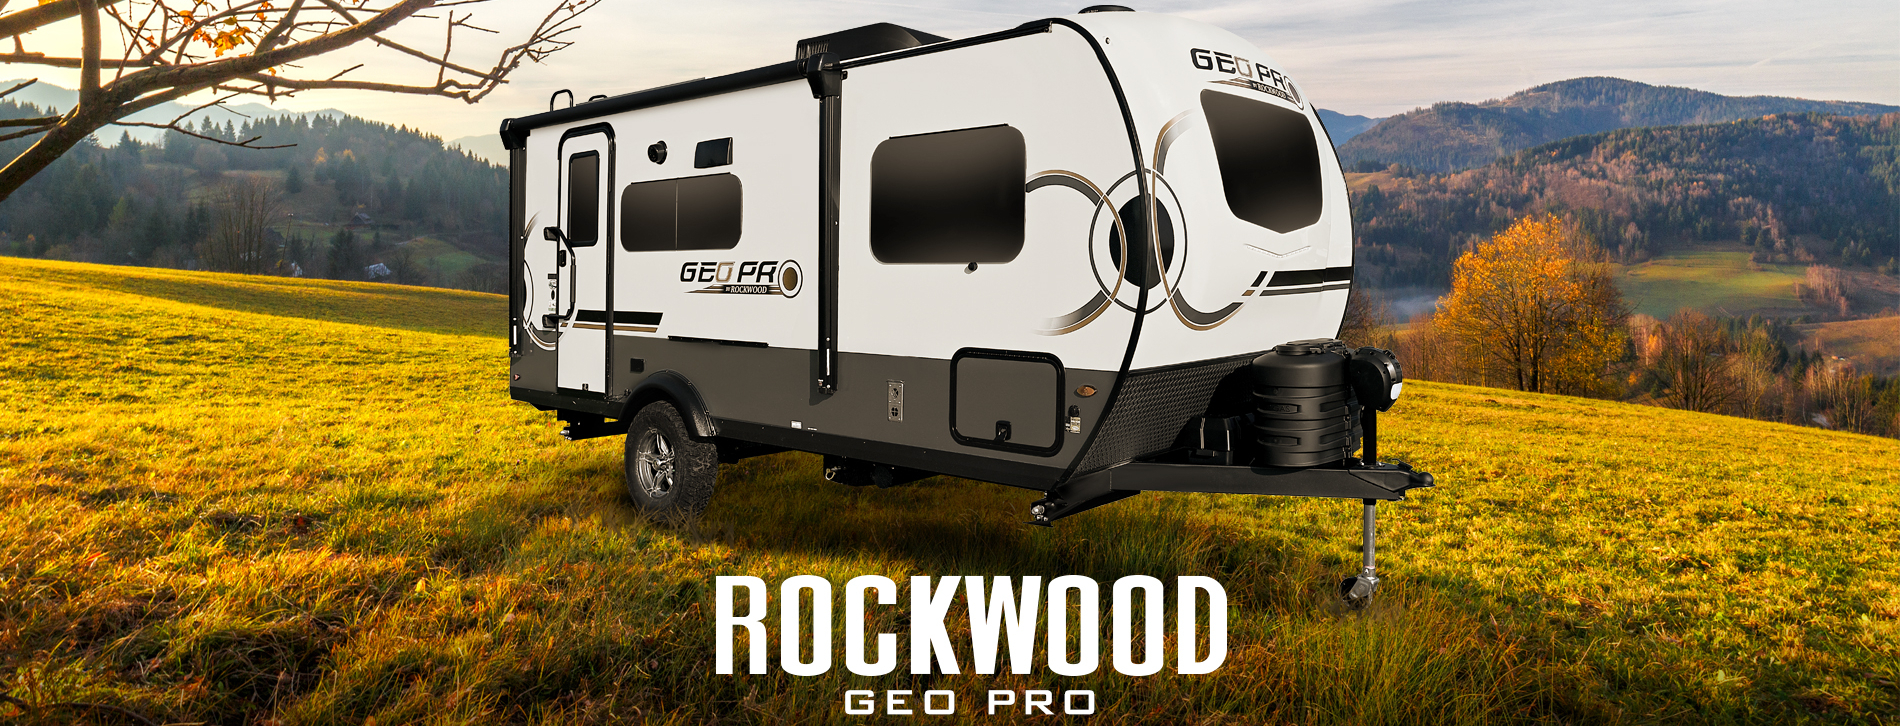 Two Forest River Rockwood GEO PRO campers parked at a campsite